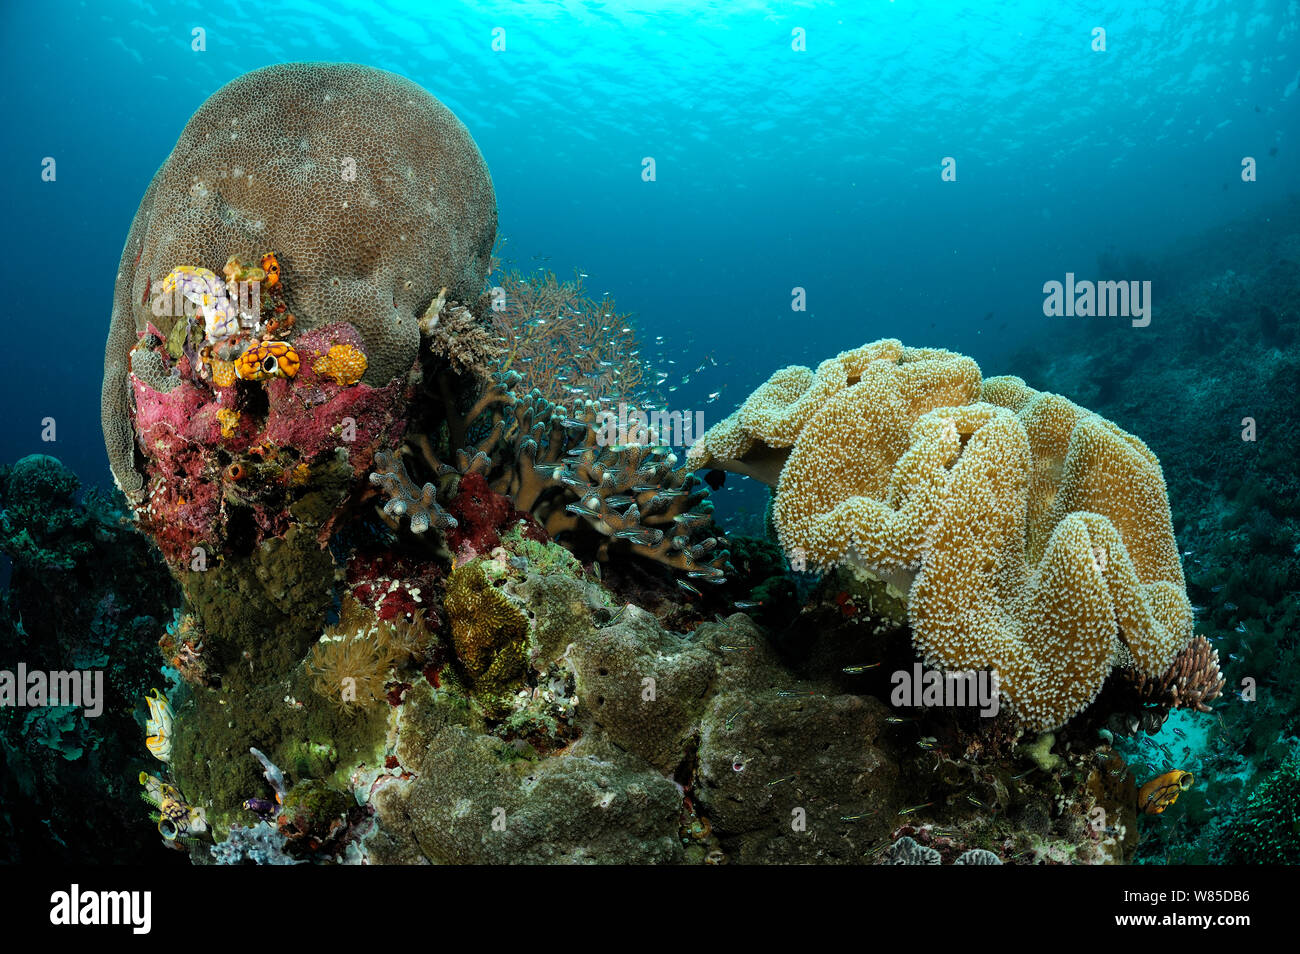 Gardiner&#39;s coral (Gardineroseris planulata) and Toadstool coral (Sarcophyton sp) on the right, Raja Ampat, West Papua, Indonesia, Pacific Ocean. Stock Photo